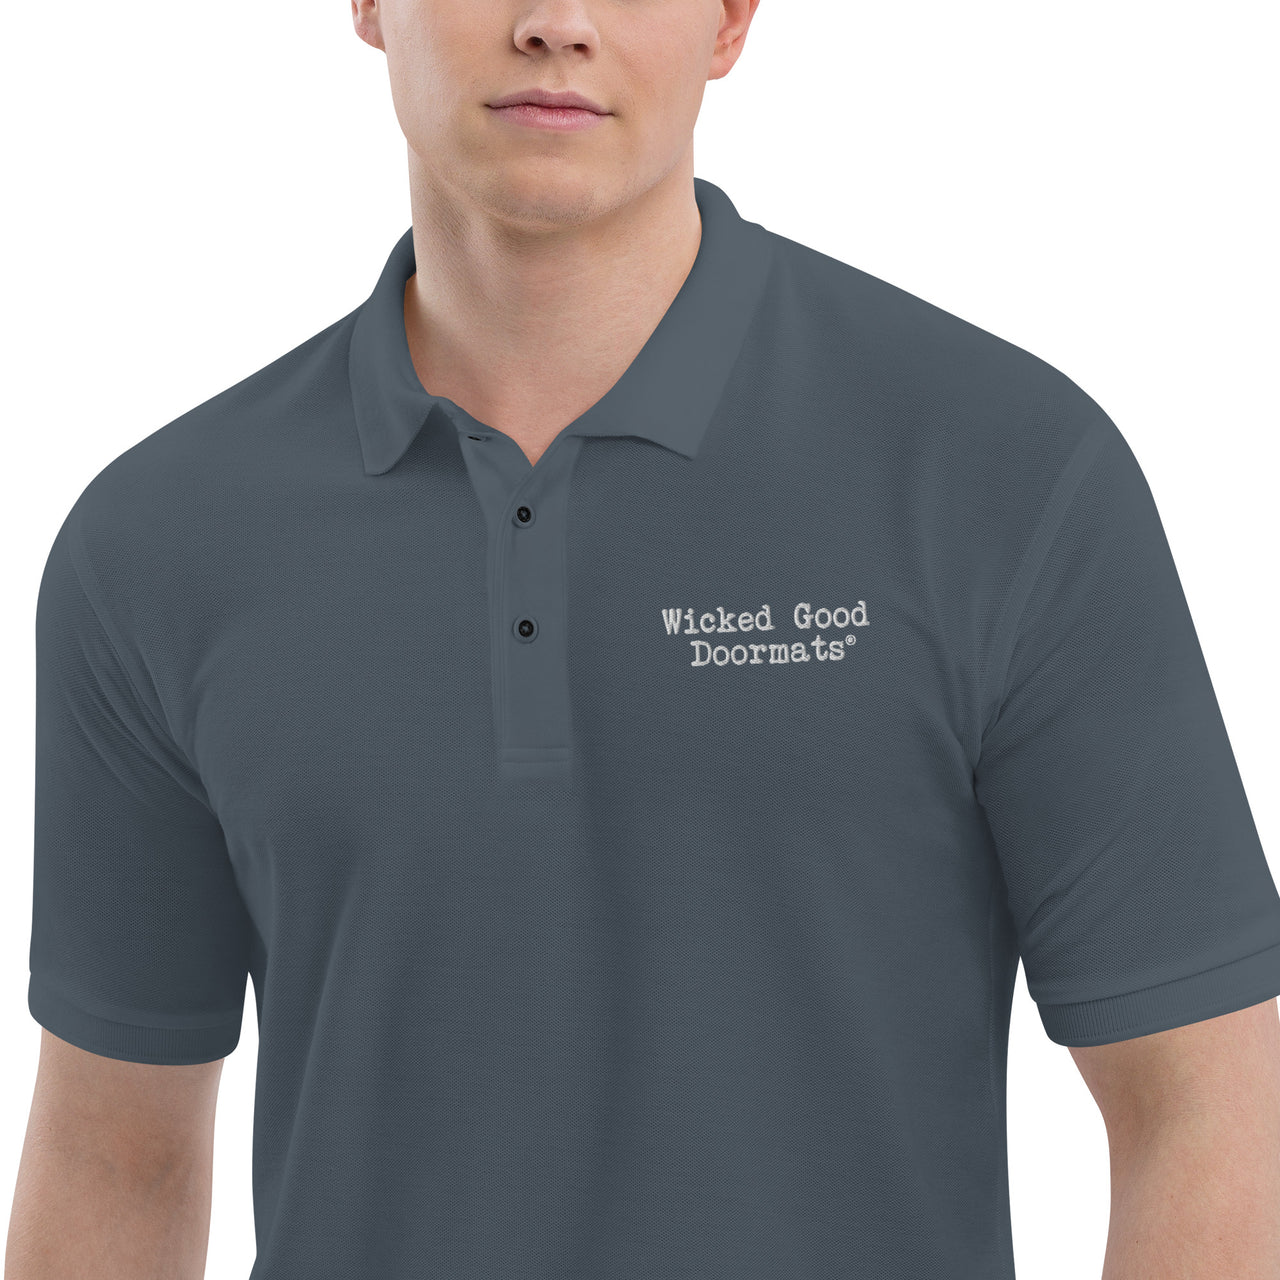 Men's Premium Polo Shirts & Tops New England Trading Co Steel Grey S 